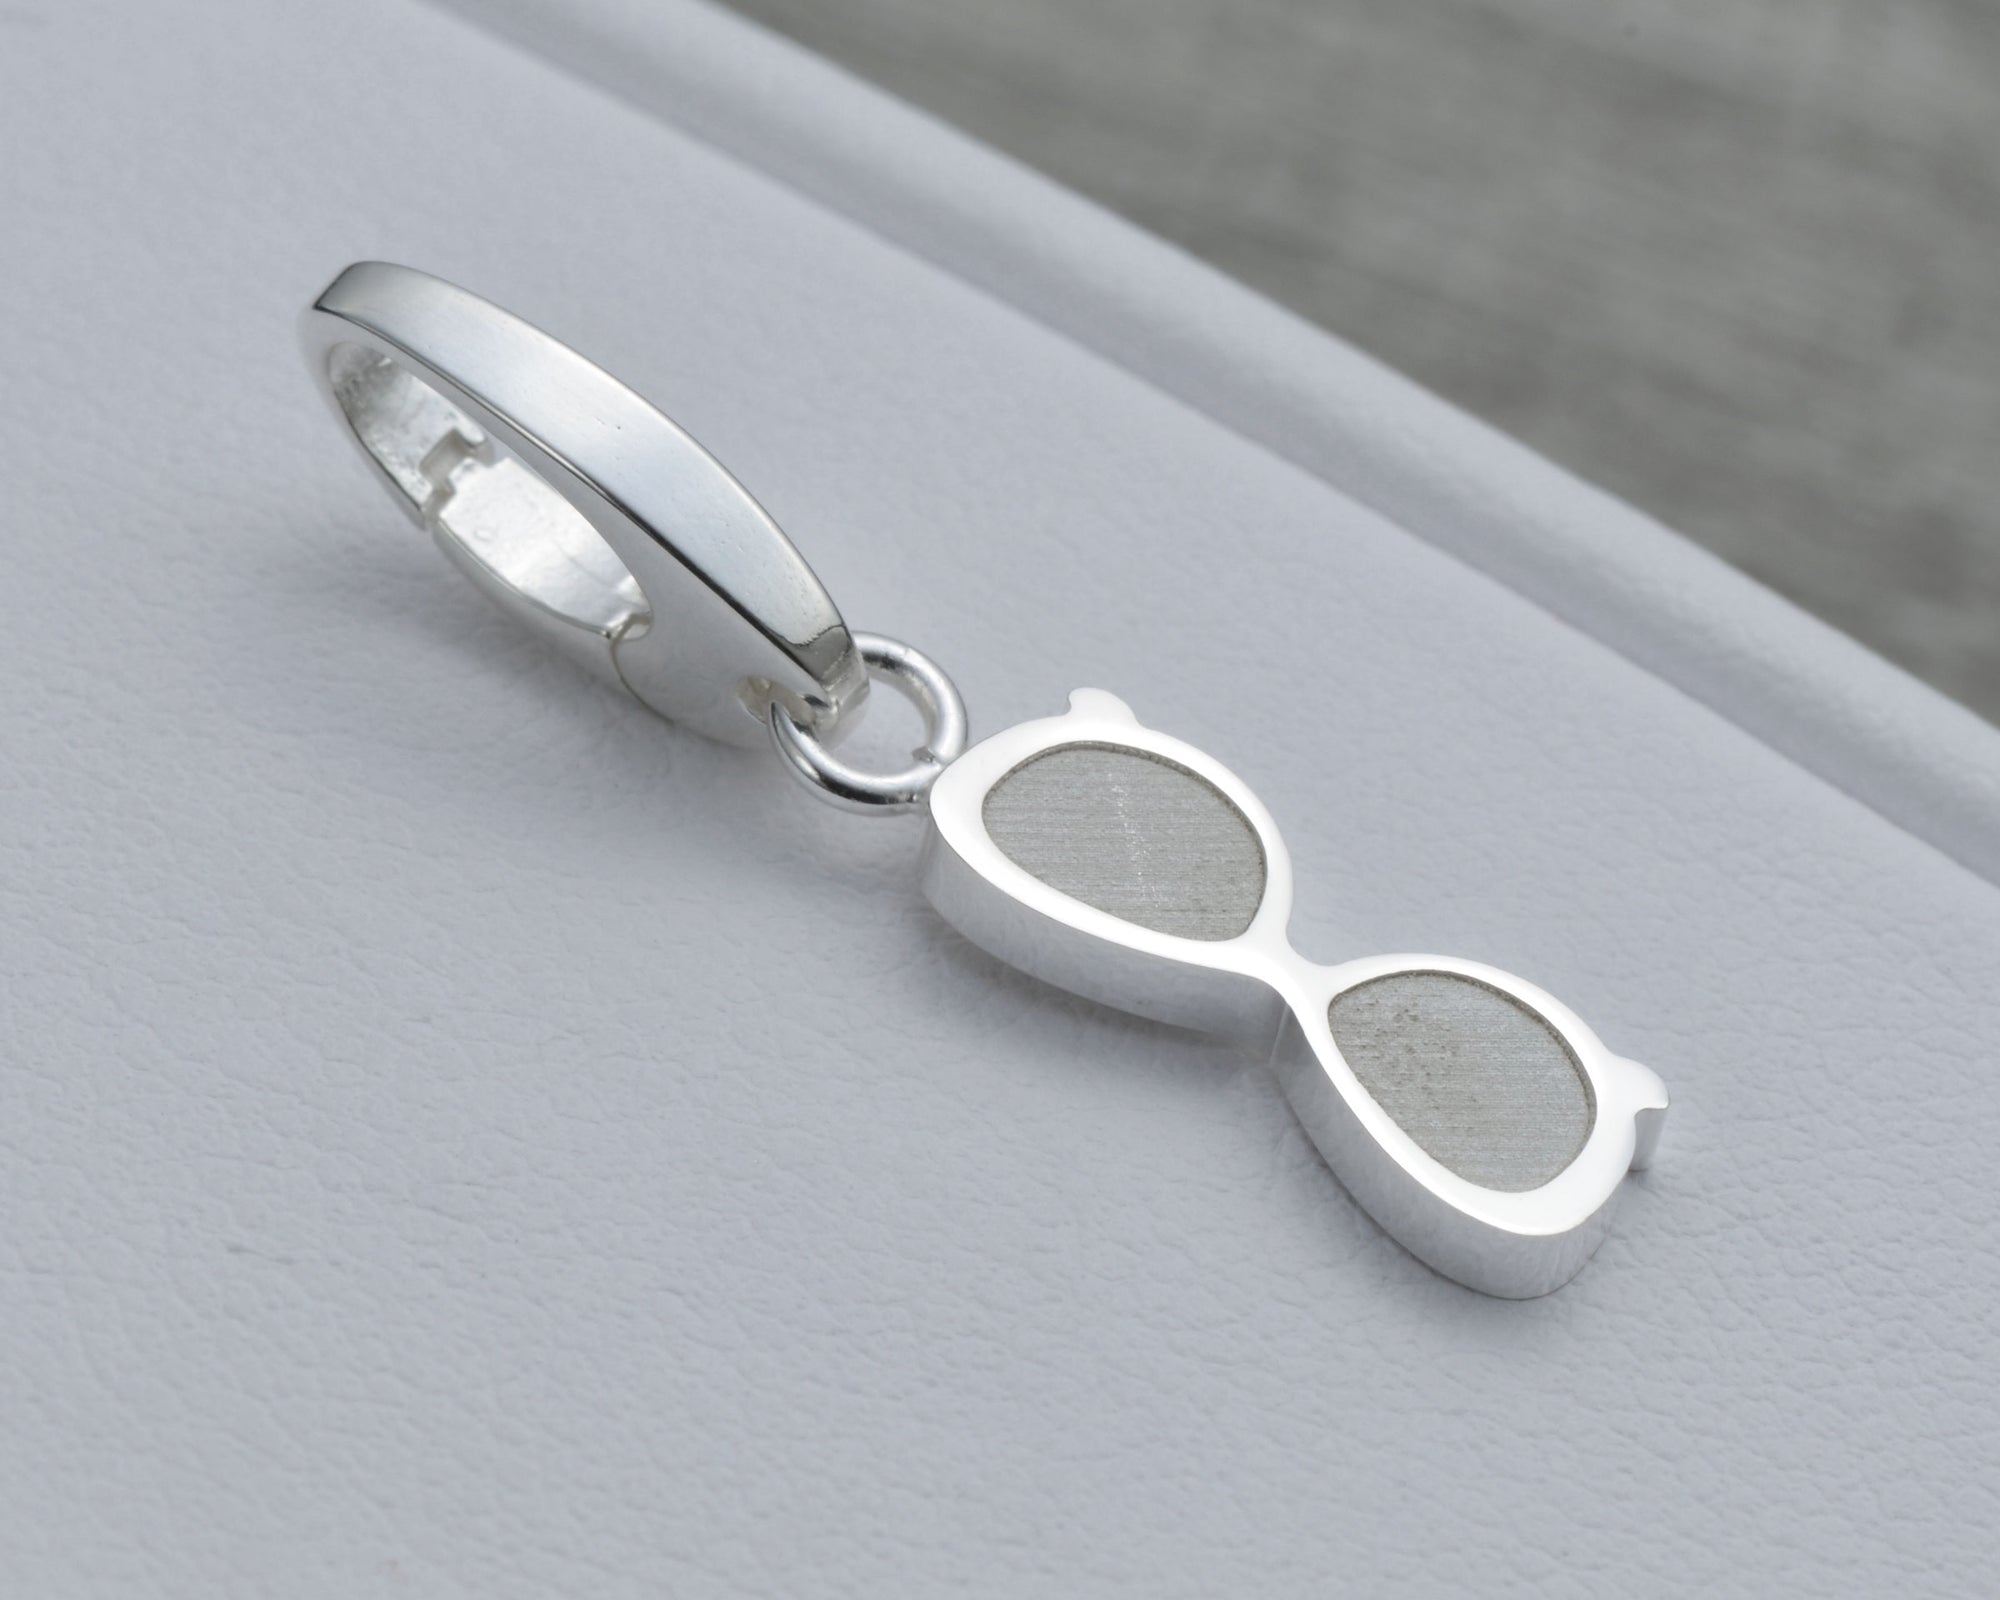 SUNGLASSES CHARM IN STERLING SILVER